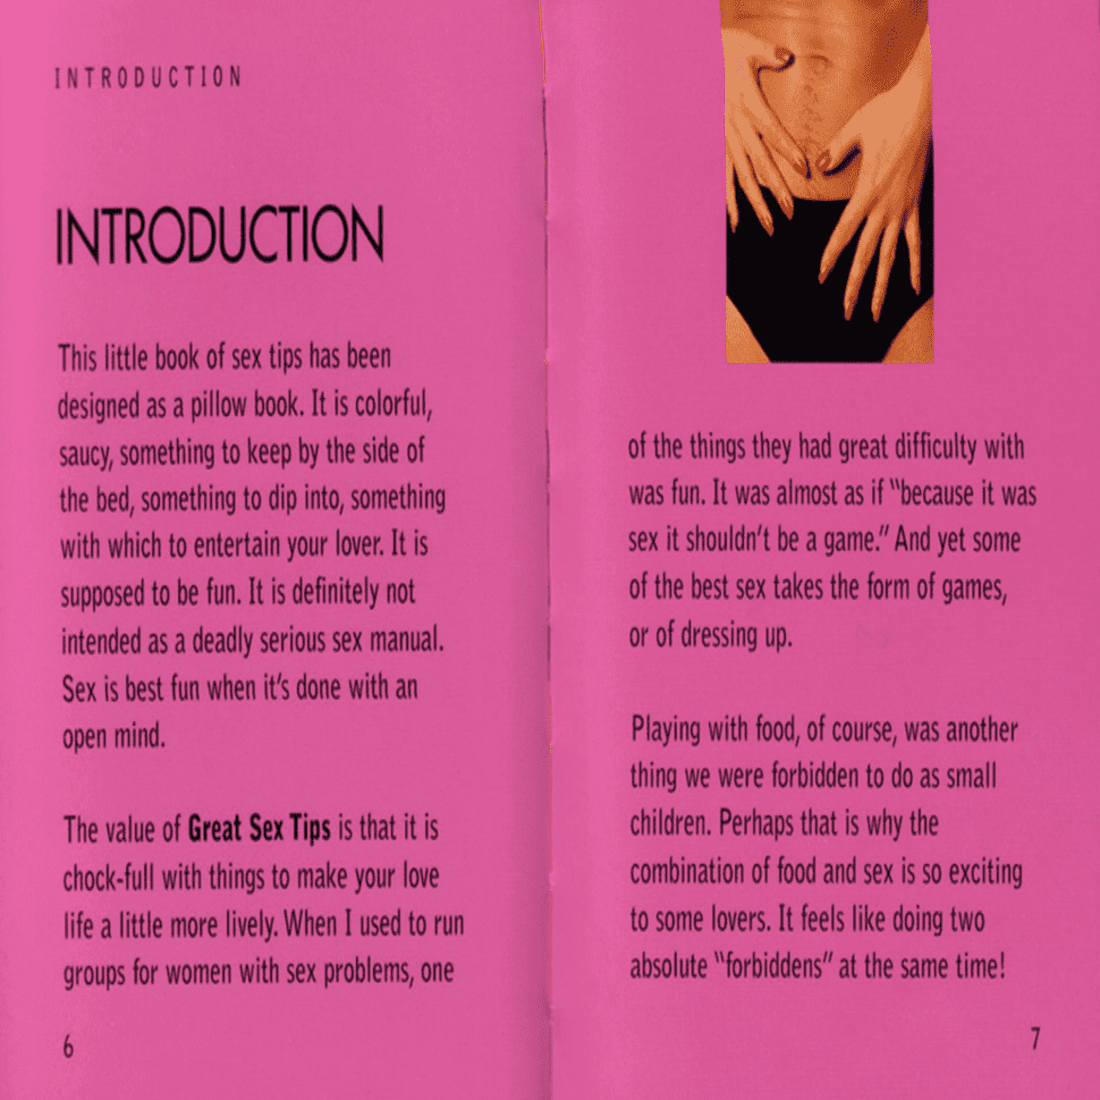 Great Sex Tips Ebook preview image.